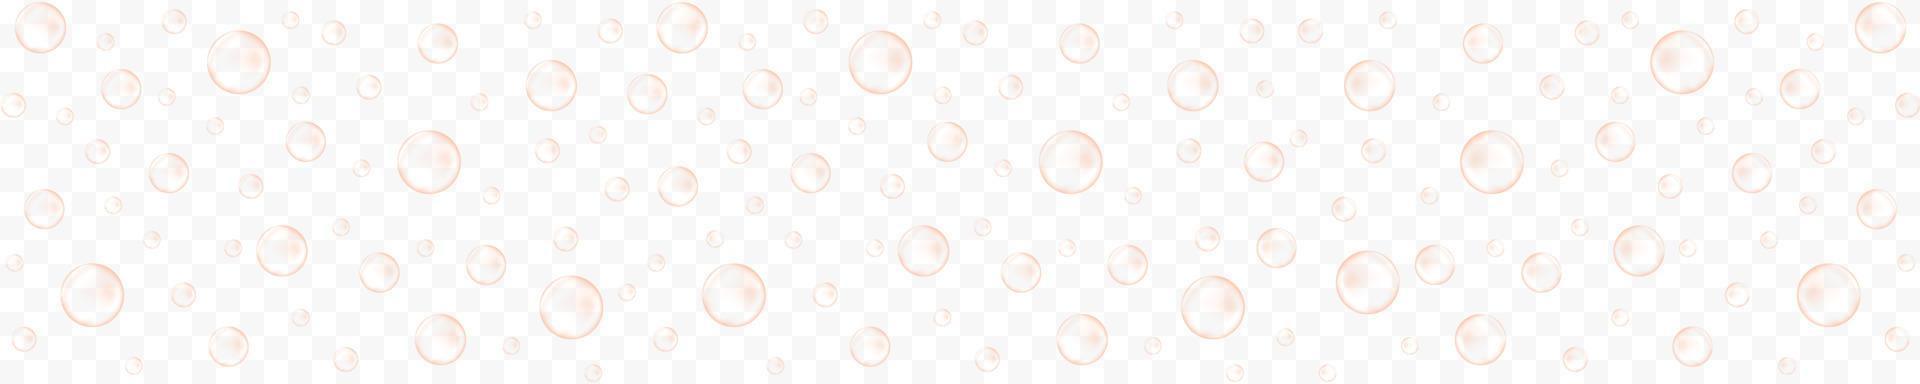 Golden air bubbles of champagne, prosecco, seltzer, soda, sparkling wine. Carbonated drink, fizz water texture on transparent background vector